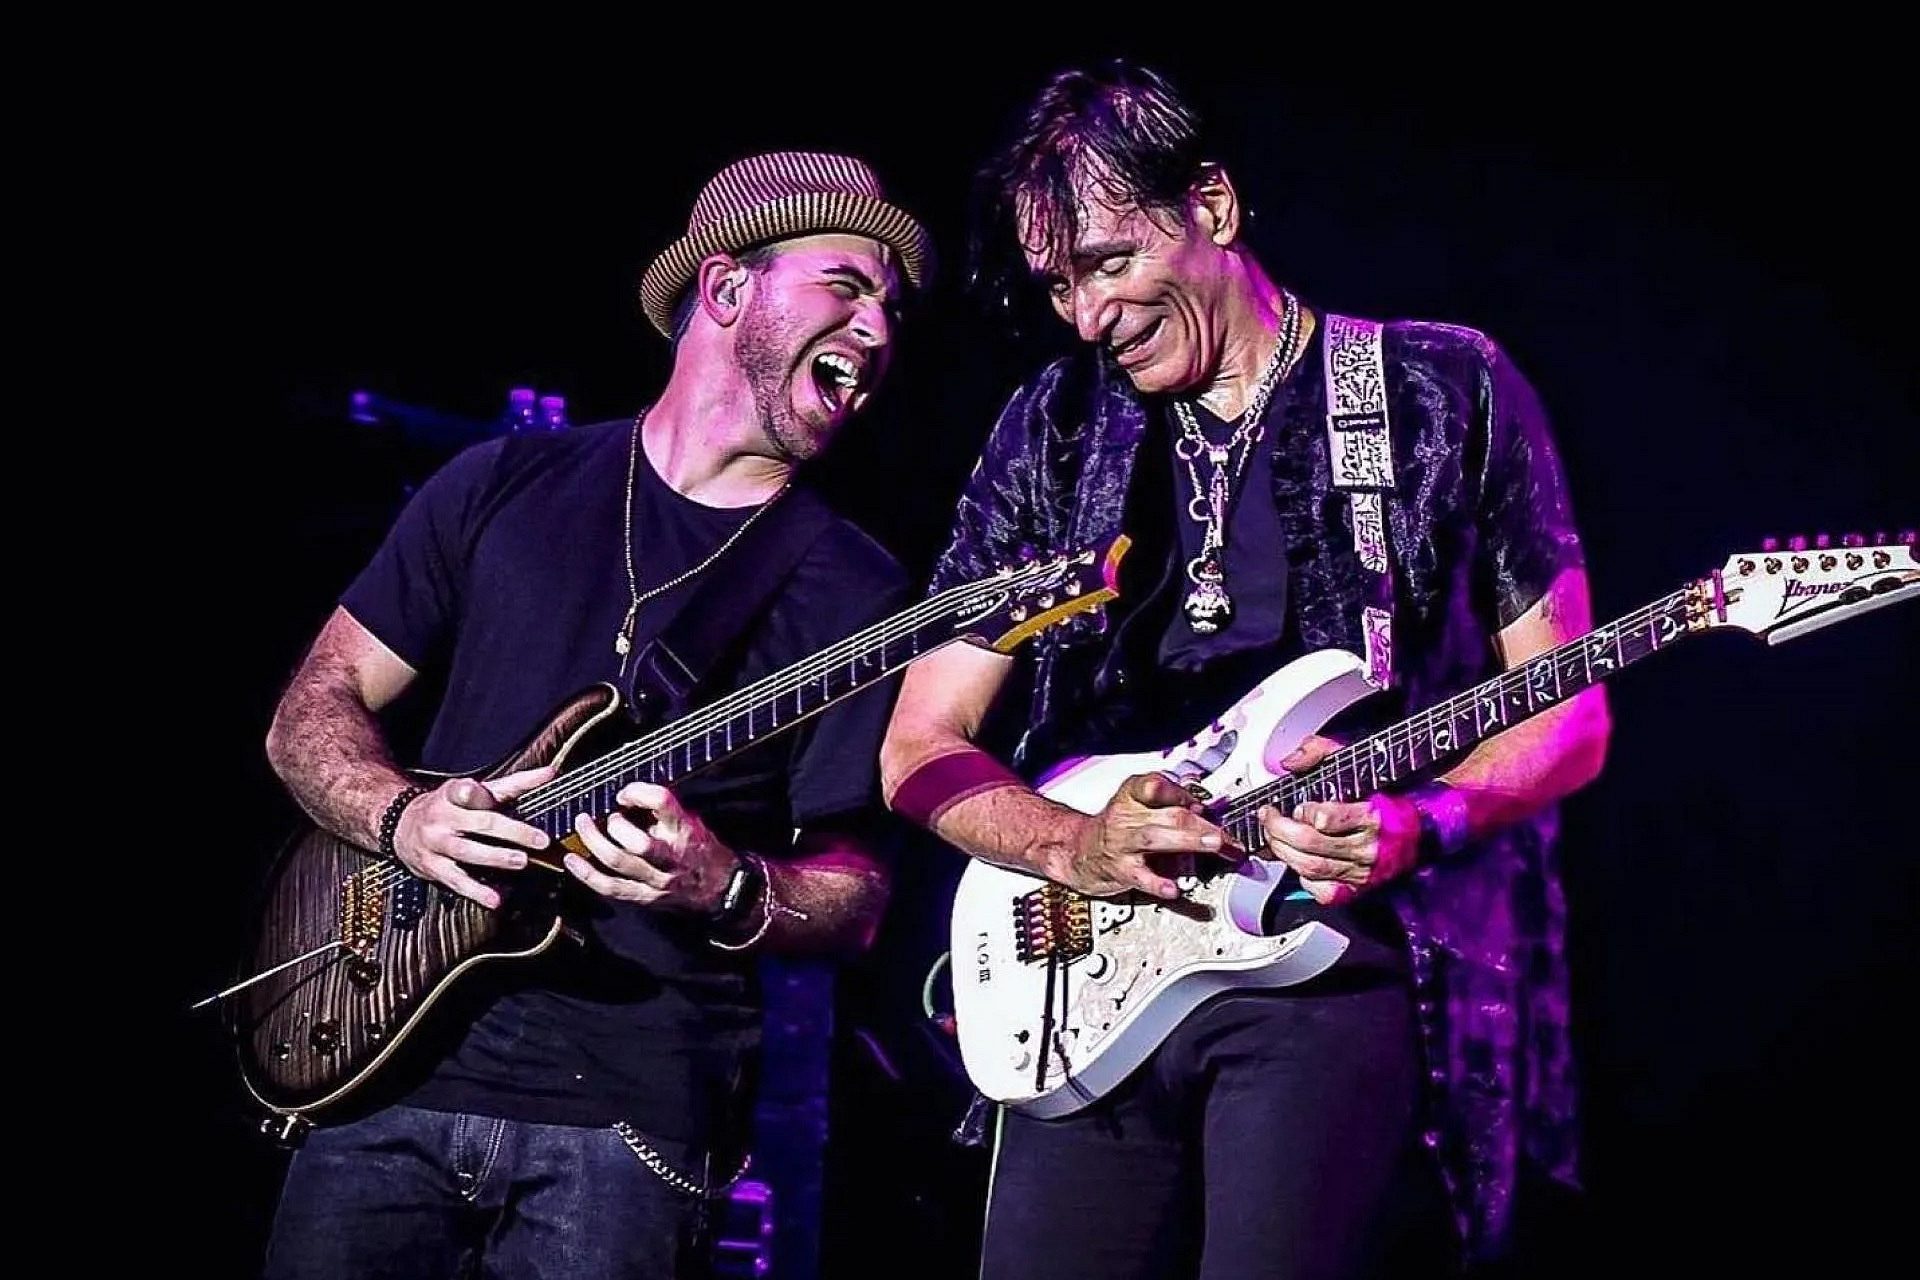 Dave Weiner Retires from Steve Vai's Touring Band